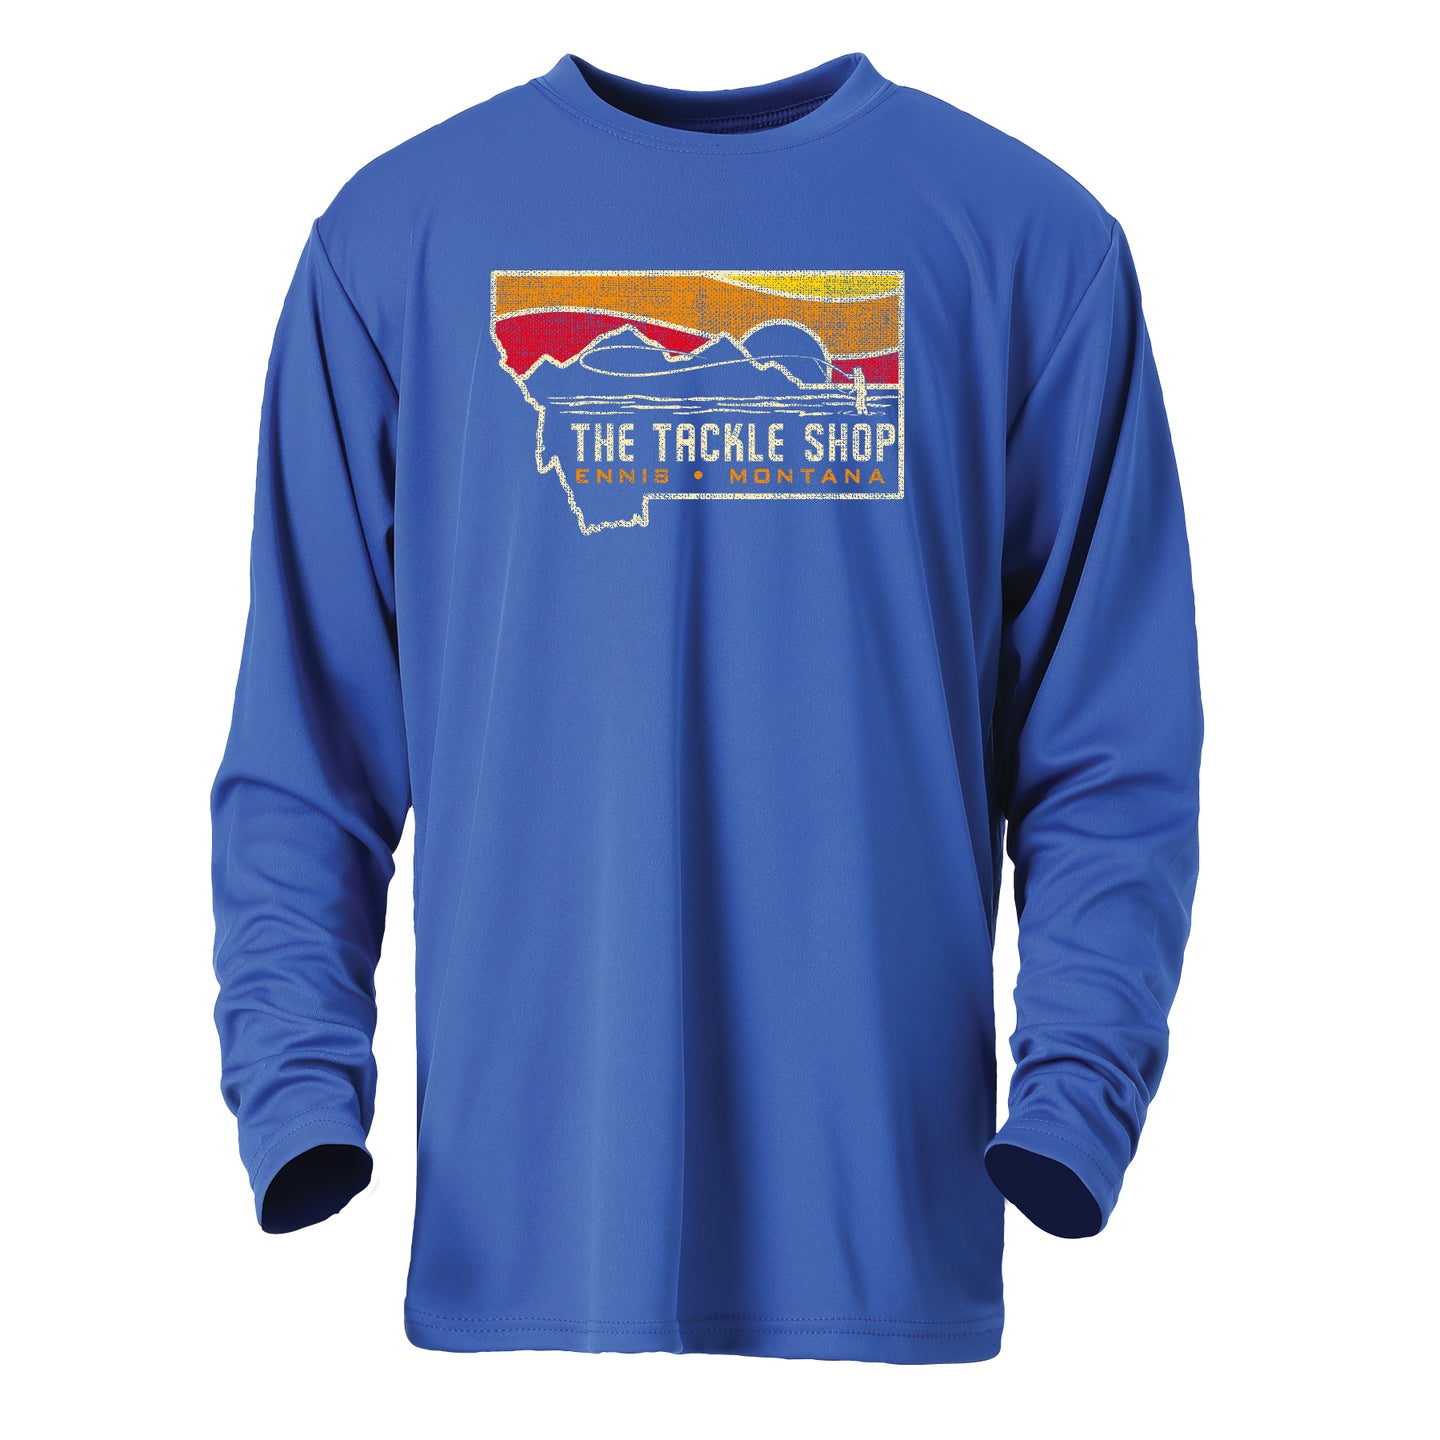 Ouray Youth Performance Long Sleeve Shirt